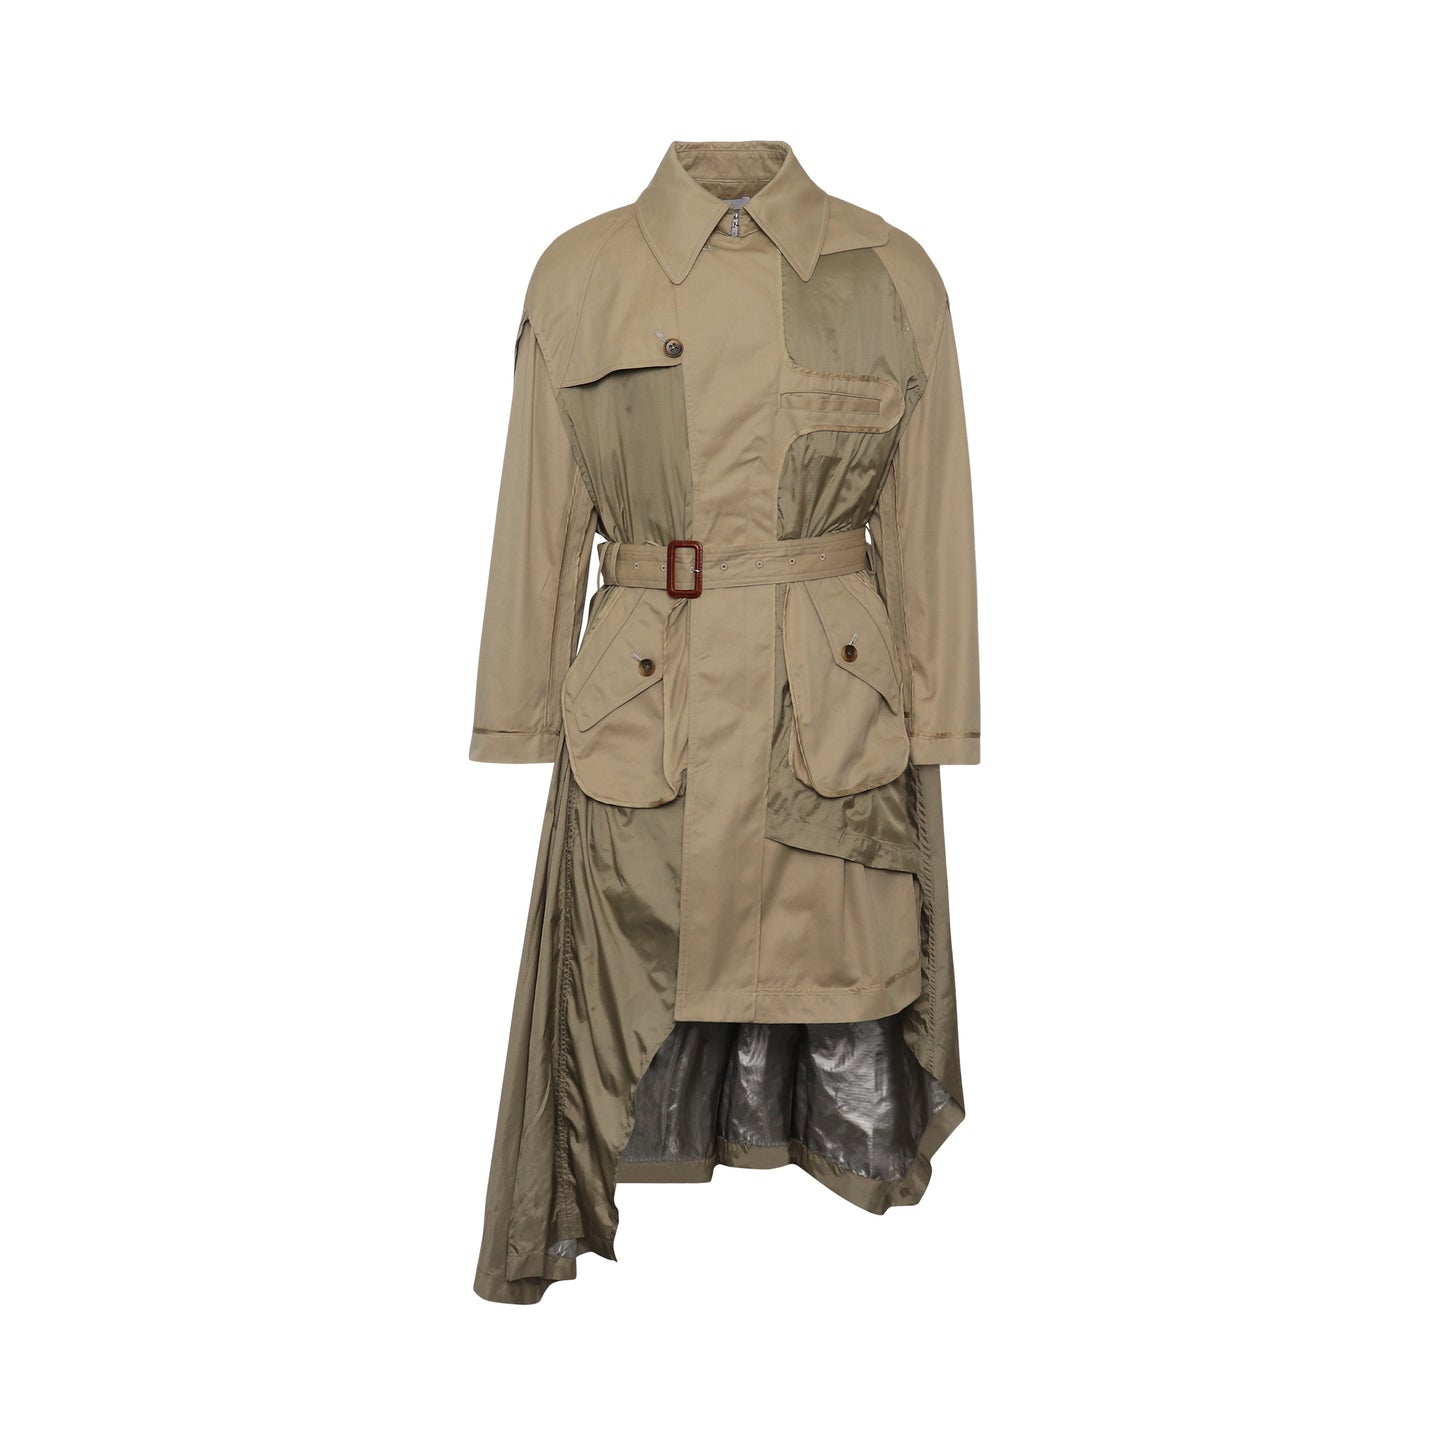 Inside-Out Trench Coat in Beige